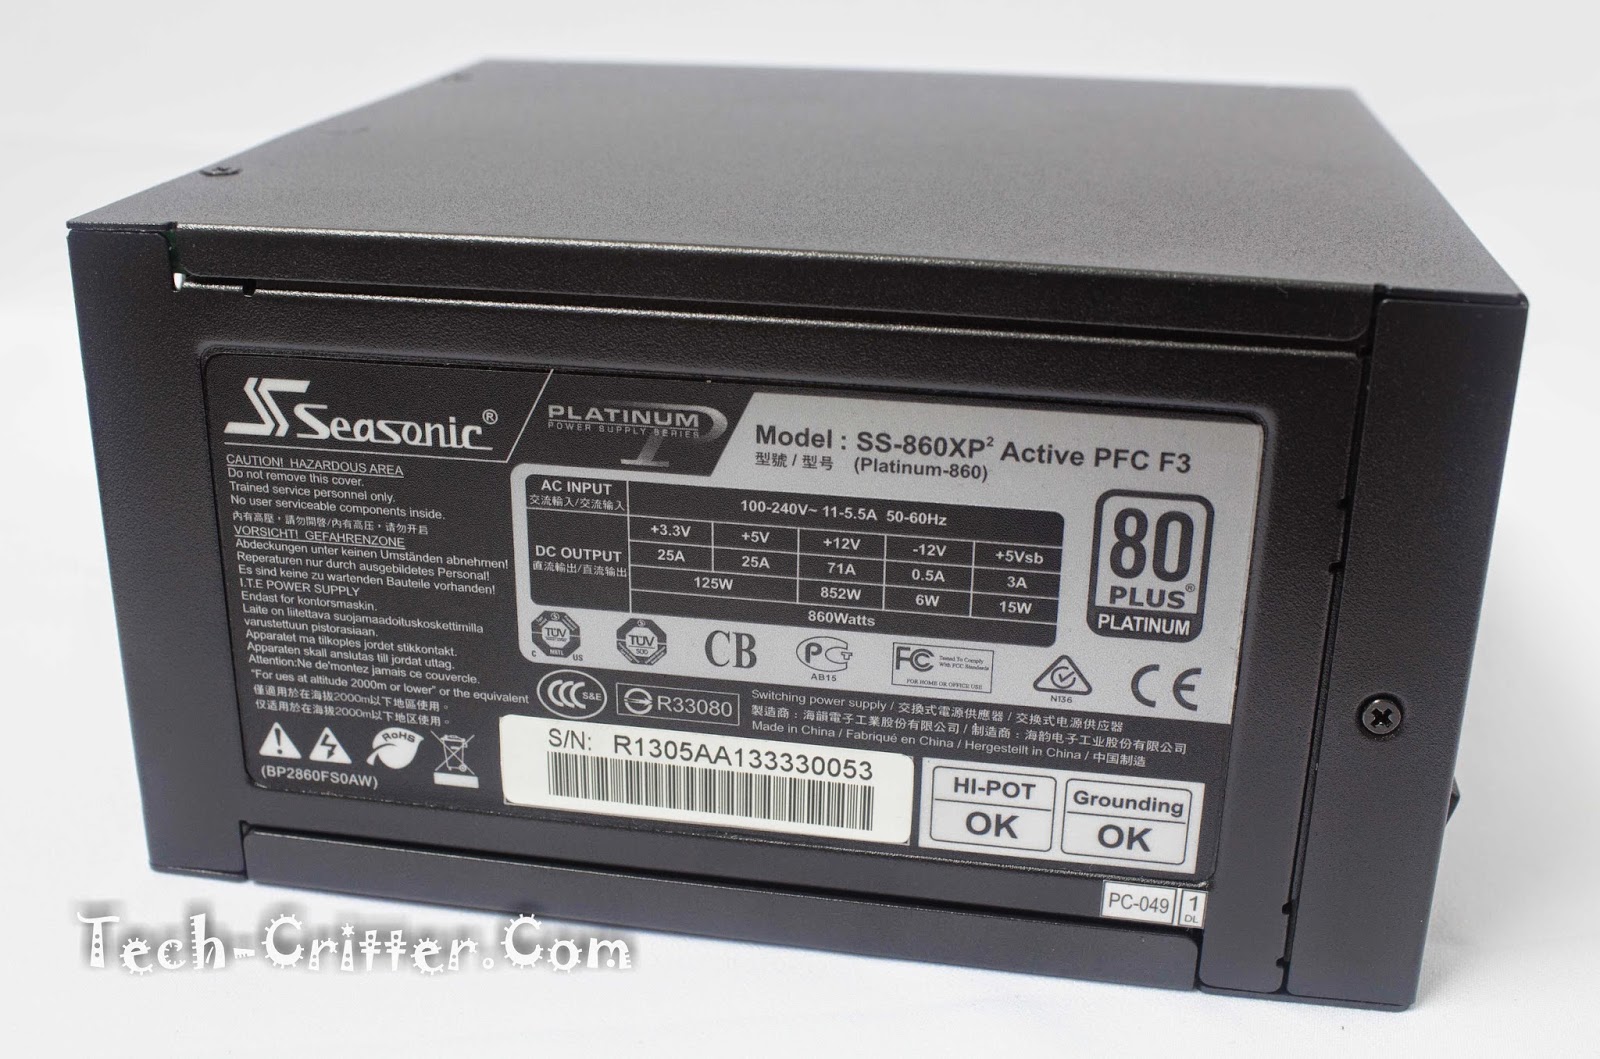 Unboxing & Overview: Seasonic Platinum Series 860W Power Supply Unit 40